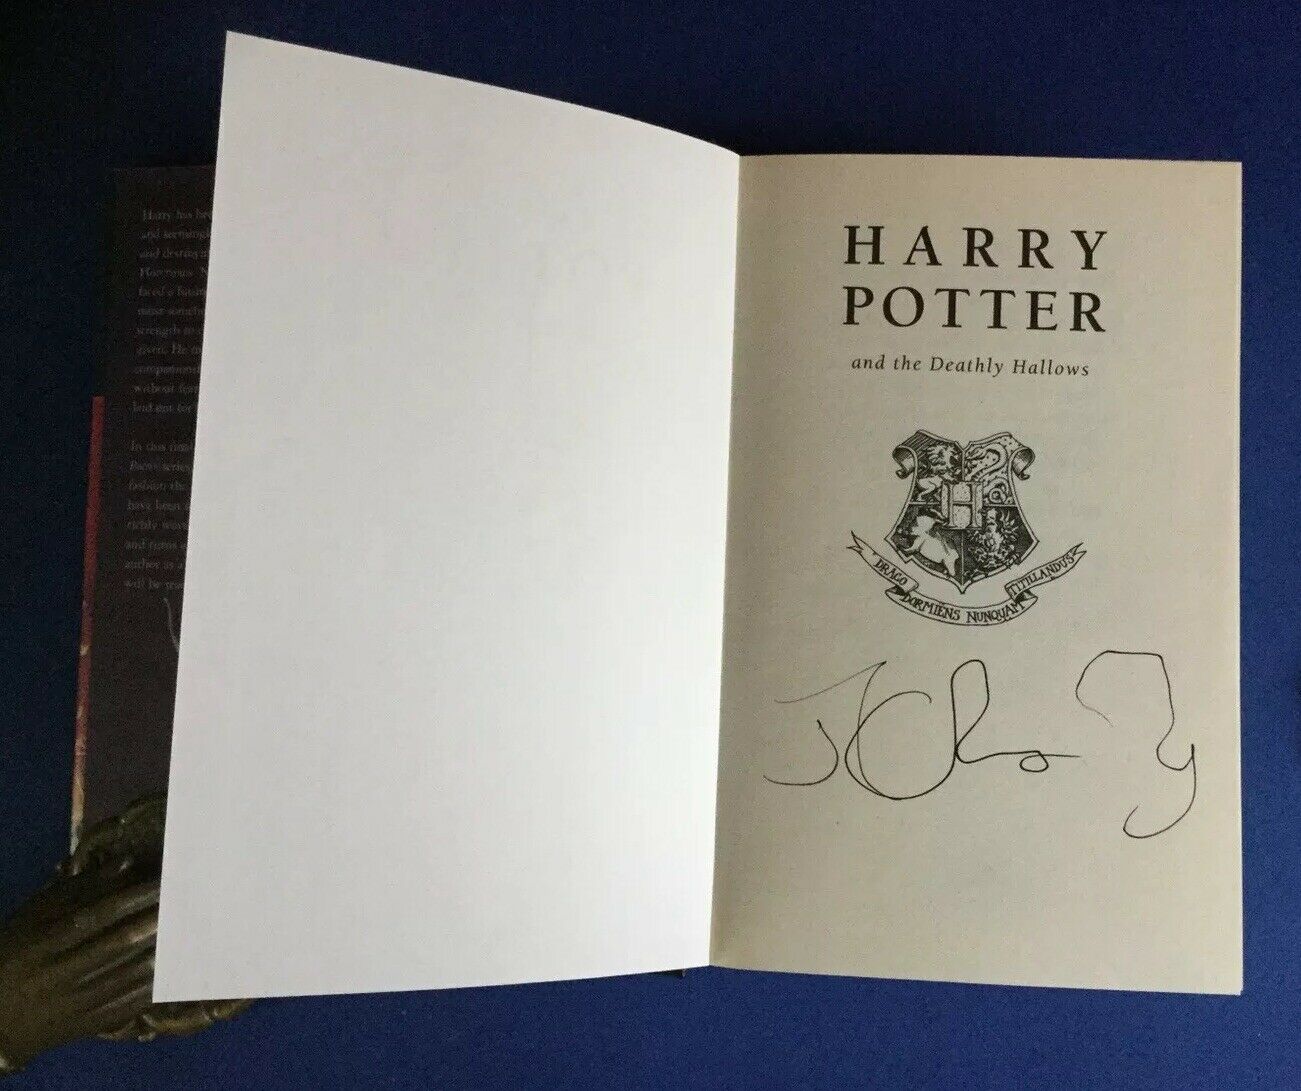 J.K. Rowling Forgery found inside a Harry Potter and the Deathly Hallows; found on eBay UK